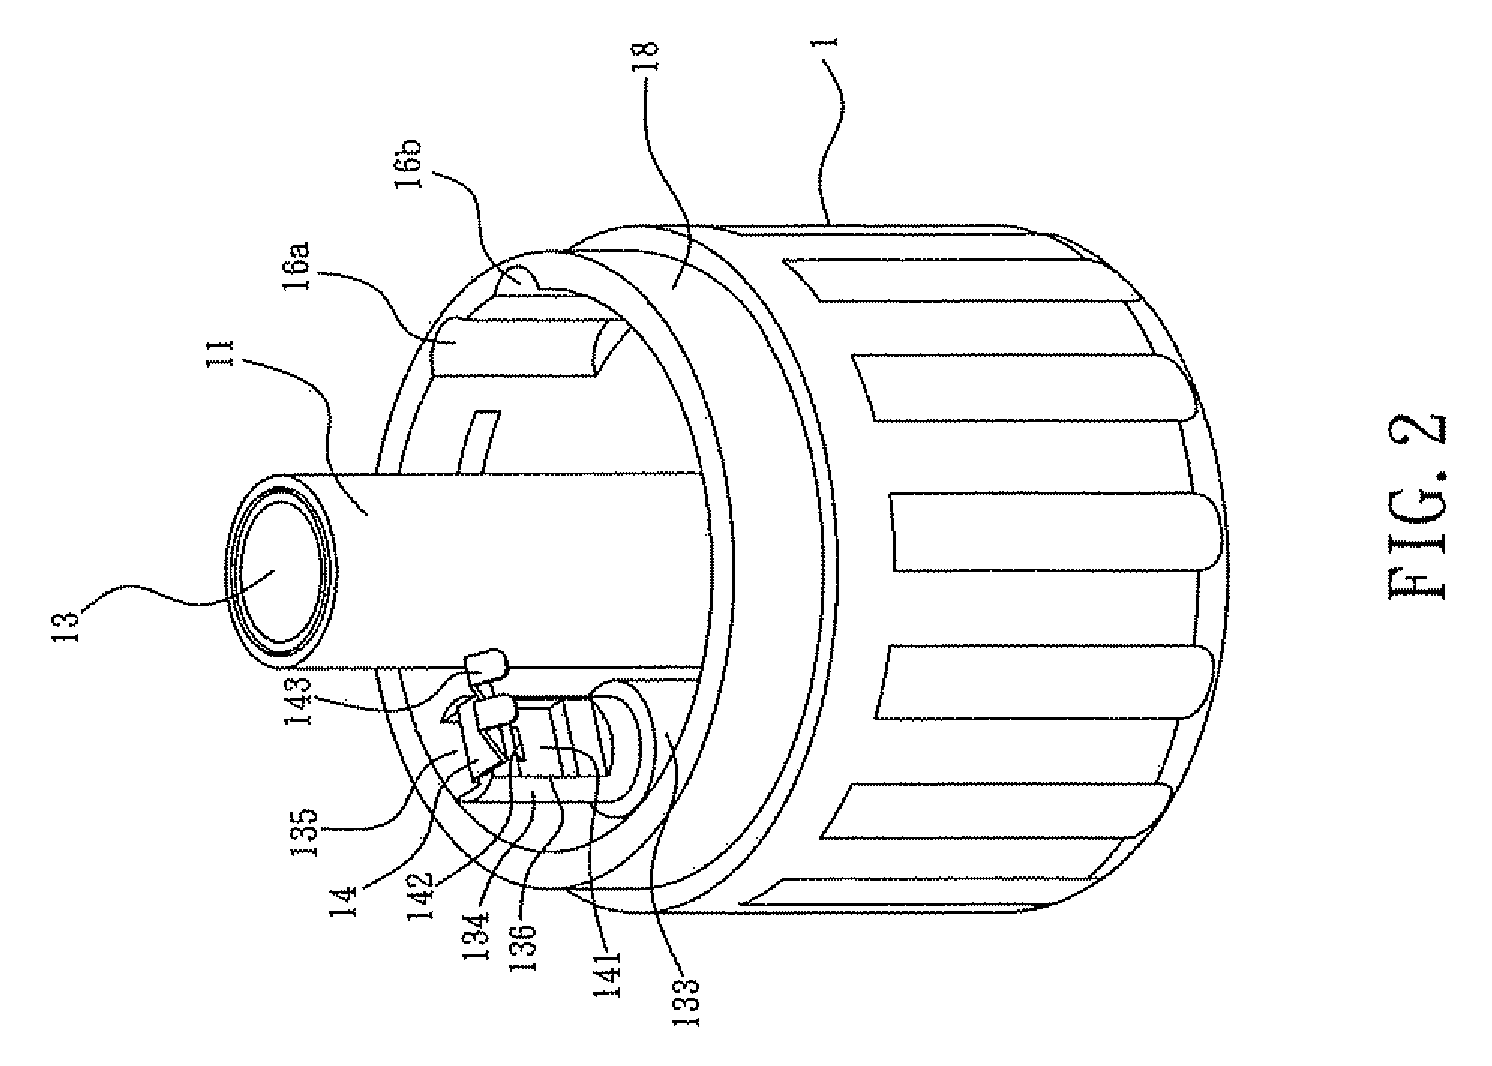 Axially-movable rotary switch